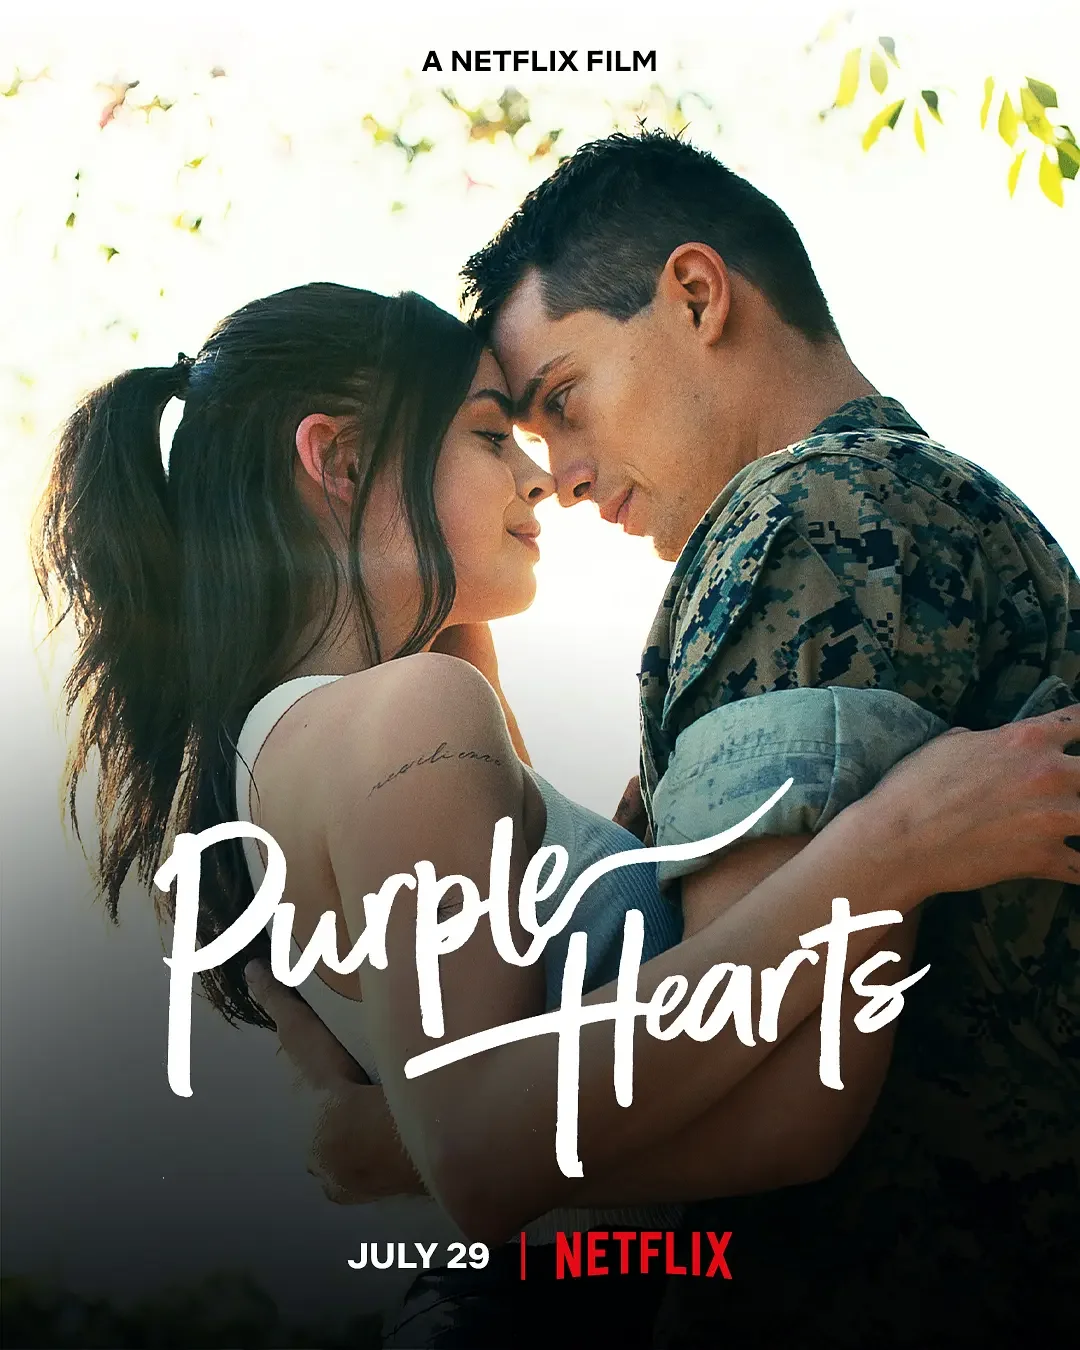 Romance "Purple Hearts" release Official Trailer, it will be launched on Netflix on July 29 | FMV6